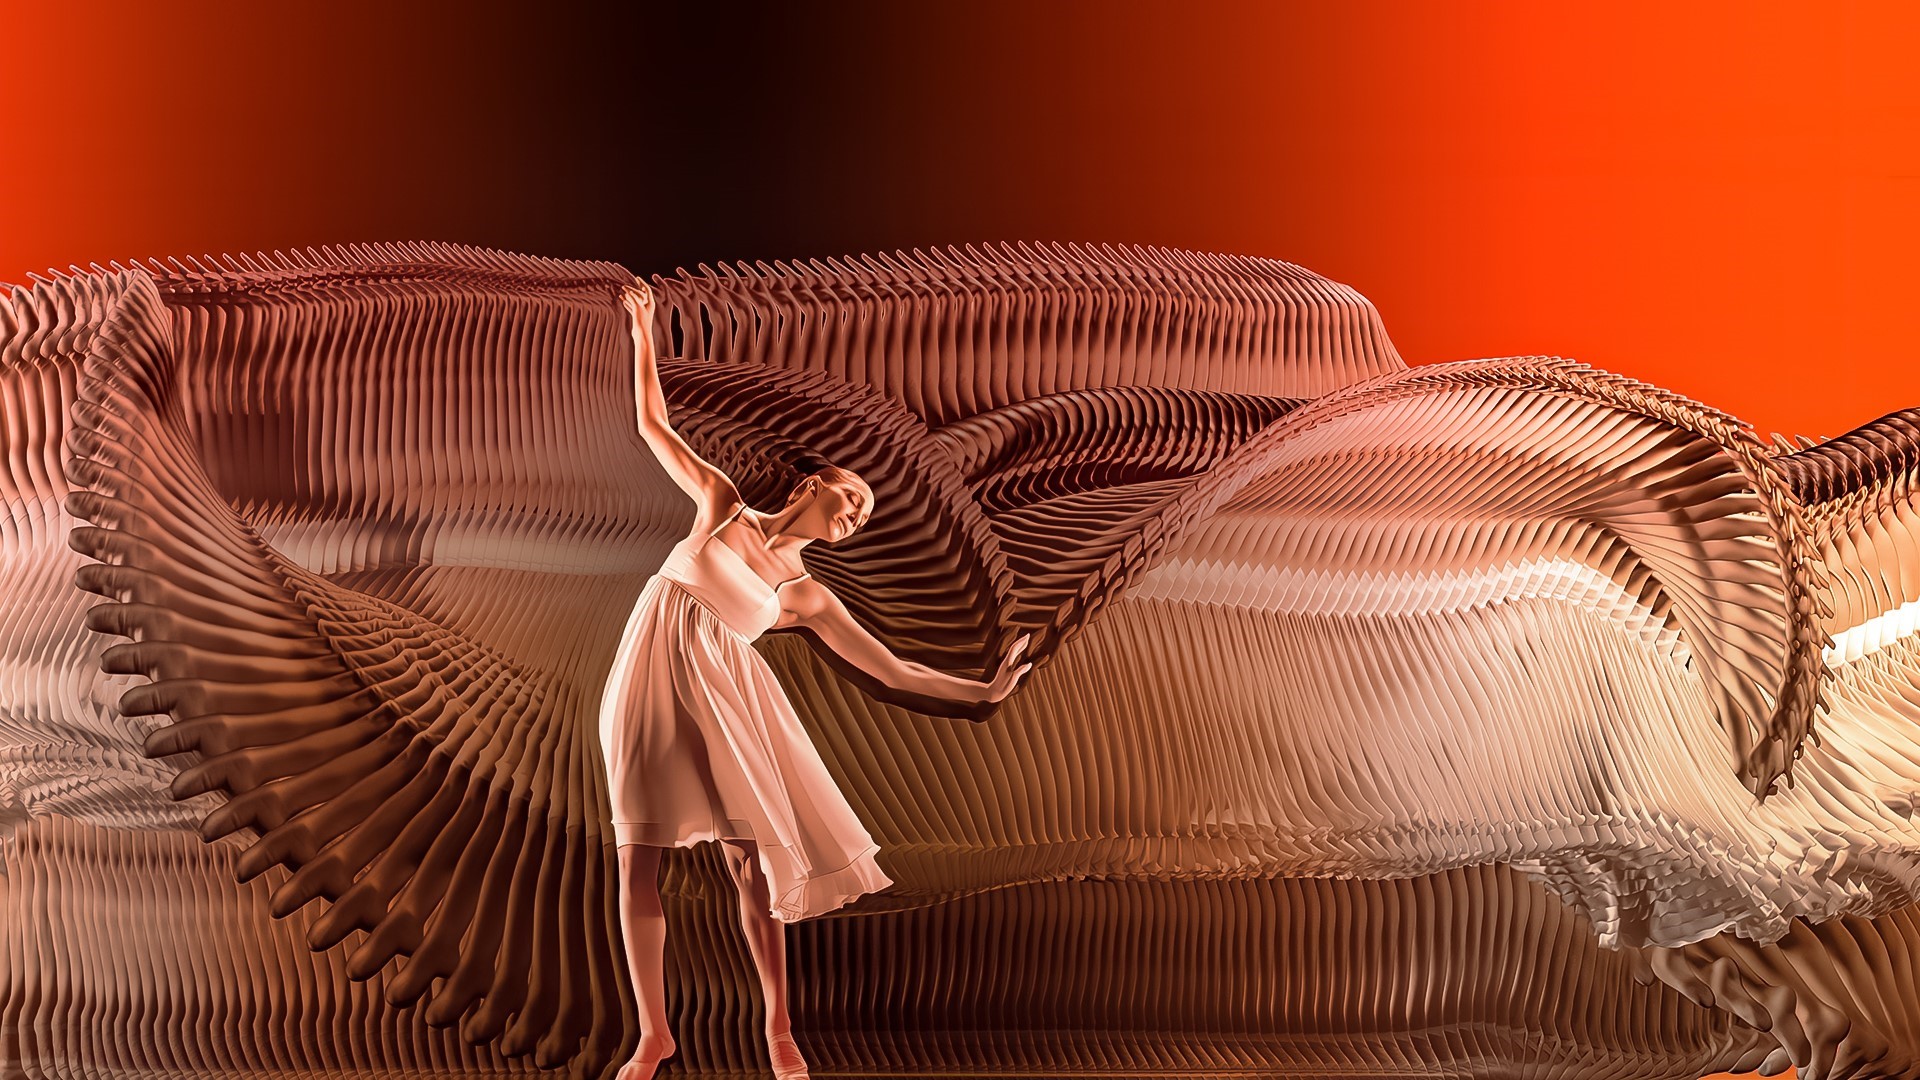 Still render from immersive installation 5 Movements. A red woman dancer and slit-scan background